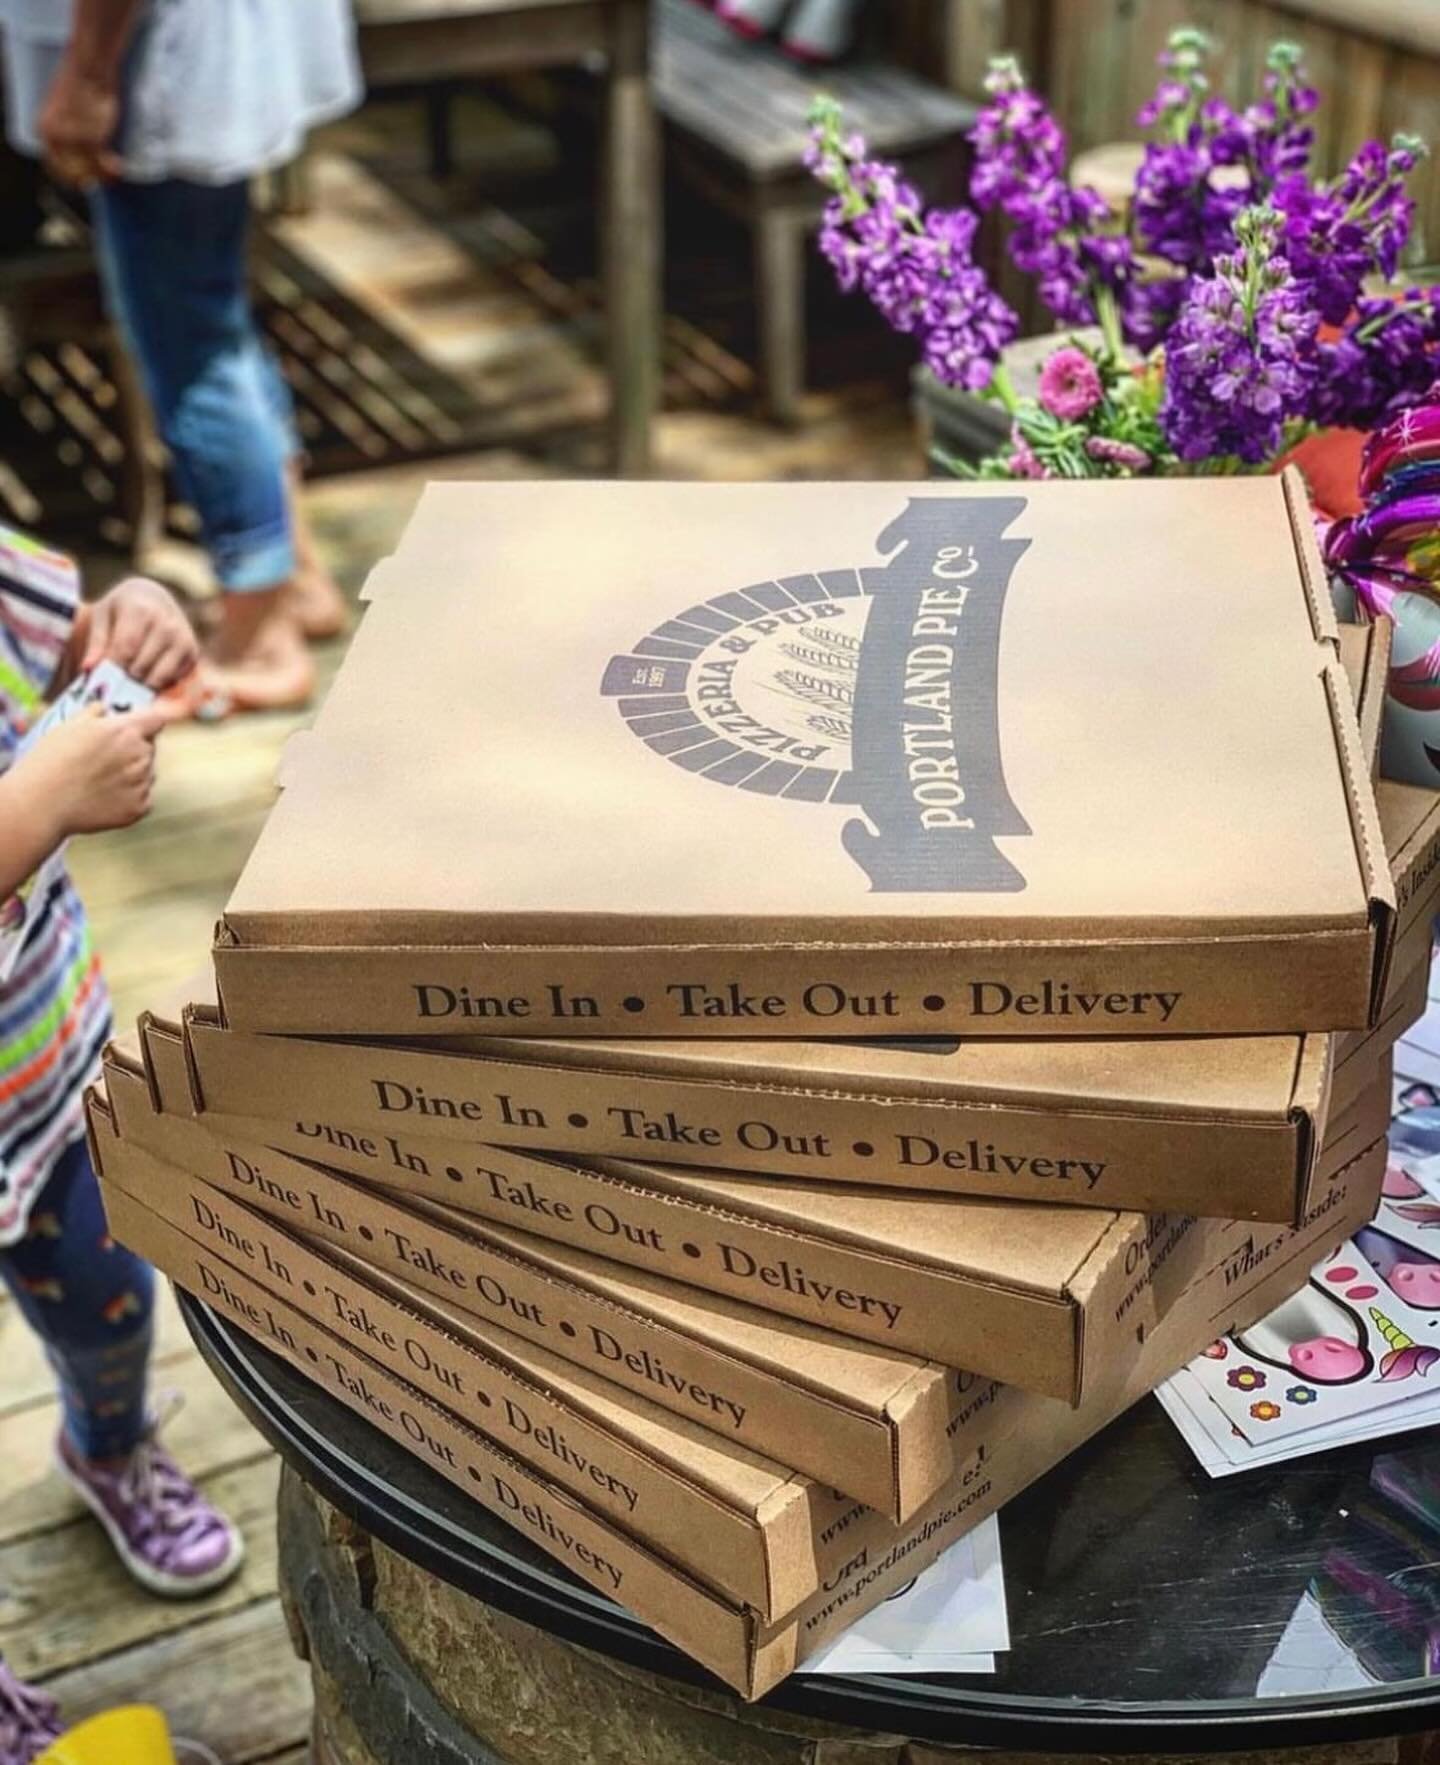 Graduation parties, backyard gatherings, family get togethers. Give us a shout and enjoy the weekend in style.

#portlandpieco #pizza #mainepizza #pizzaparty #graduationparty #catering